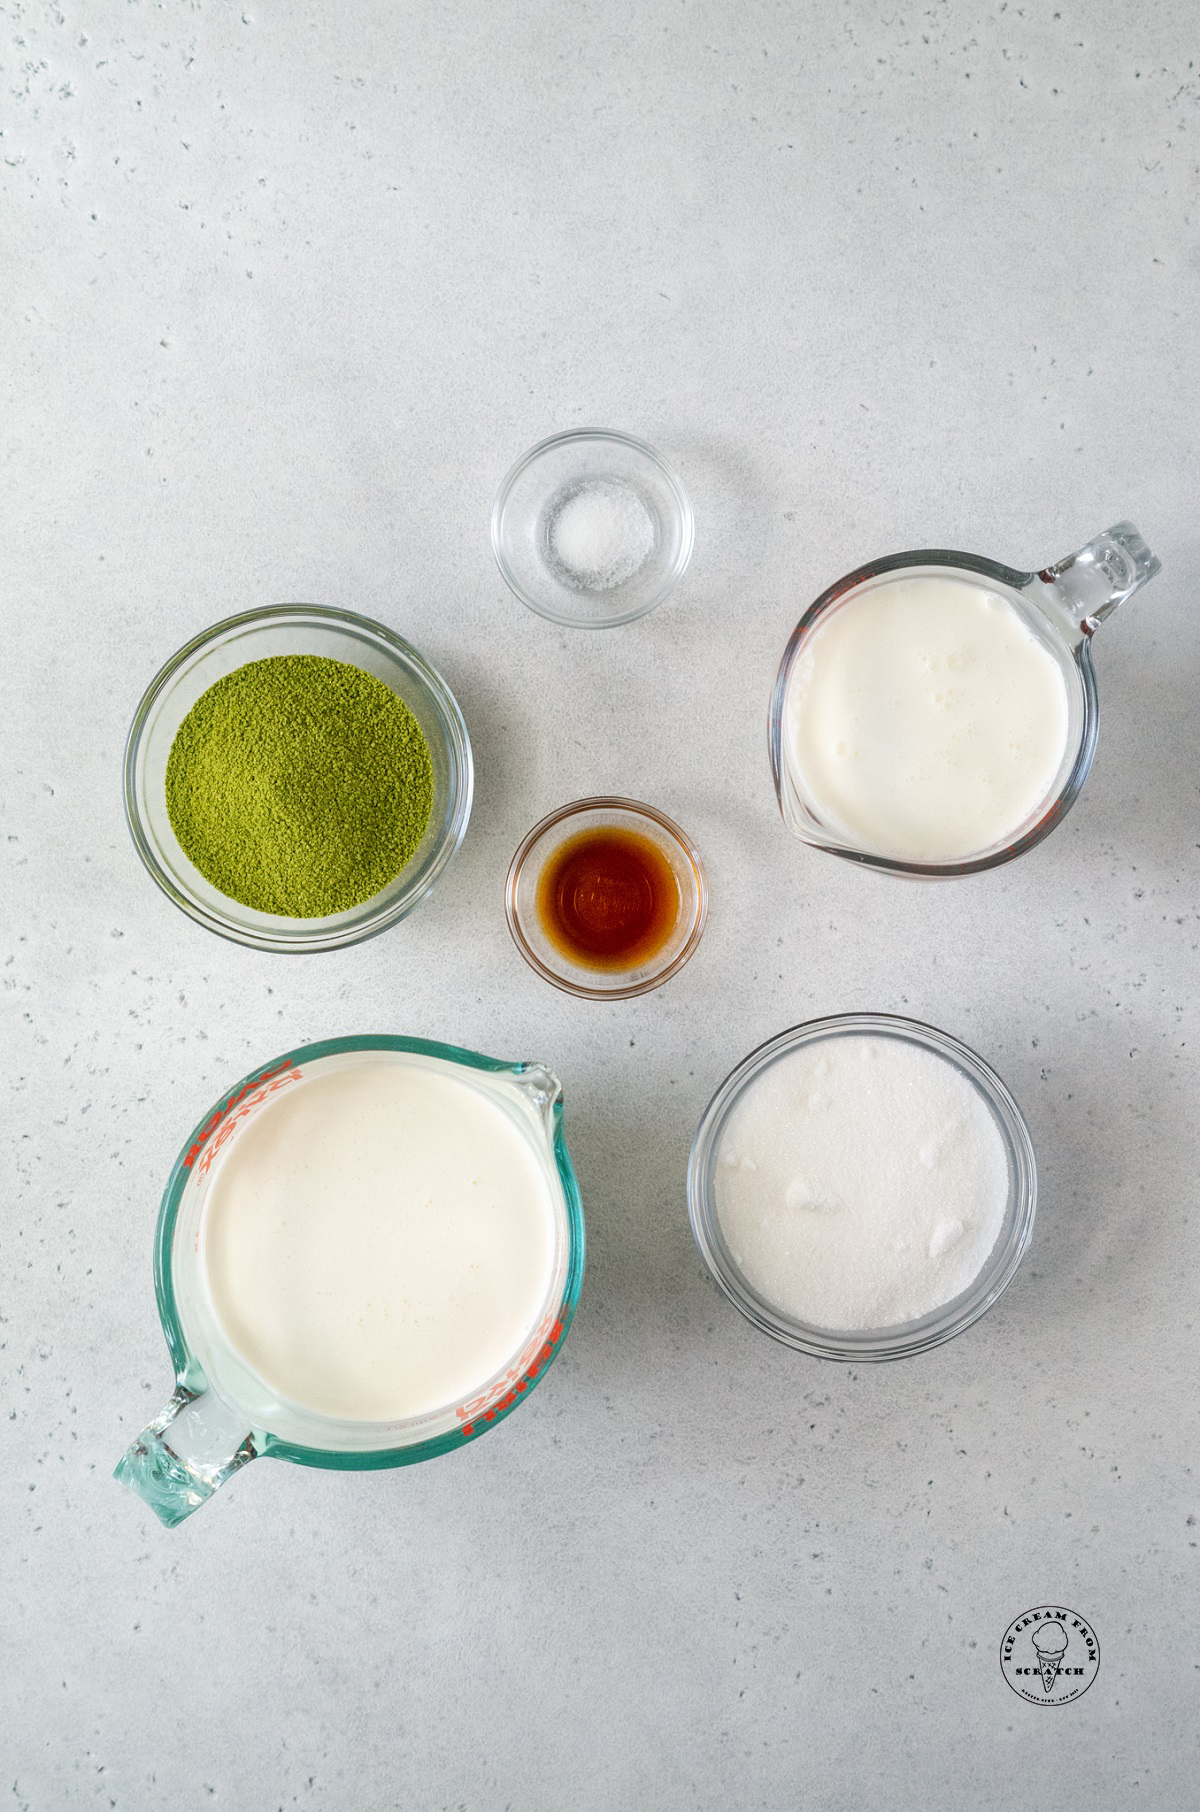 The ingredients needed for making homemade matcha ice cream.